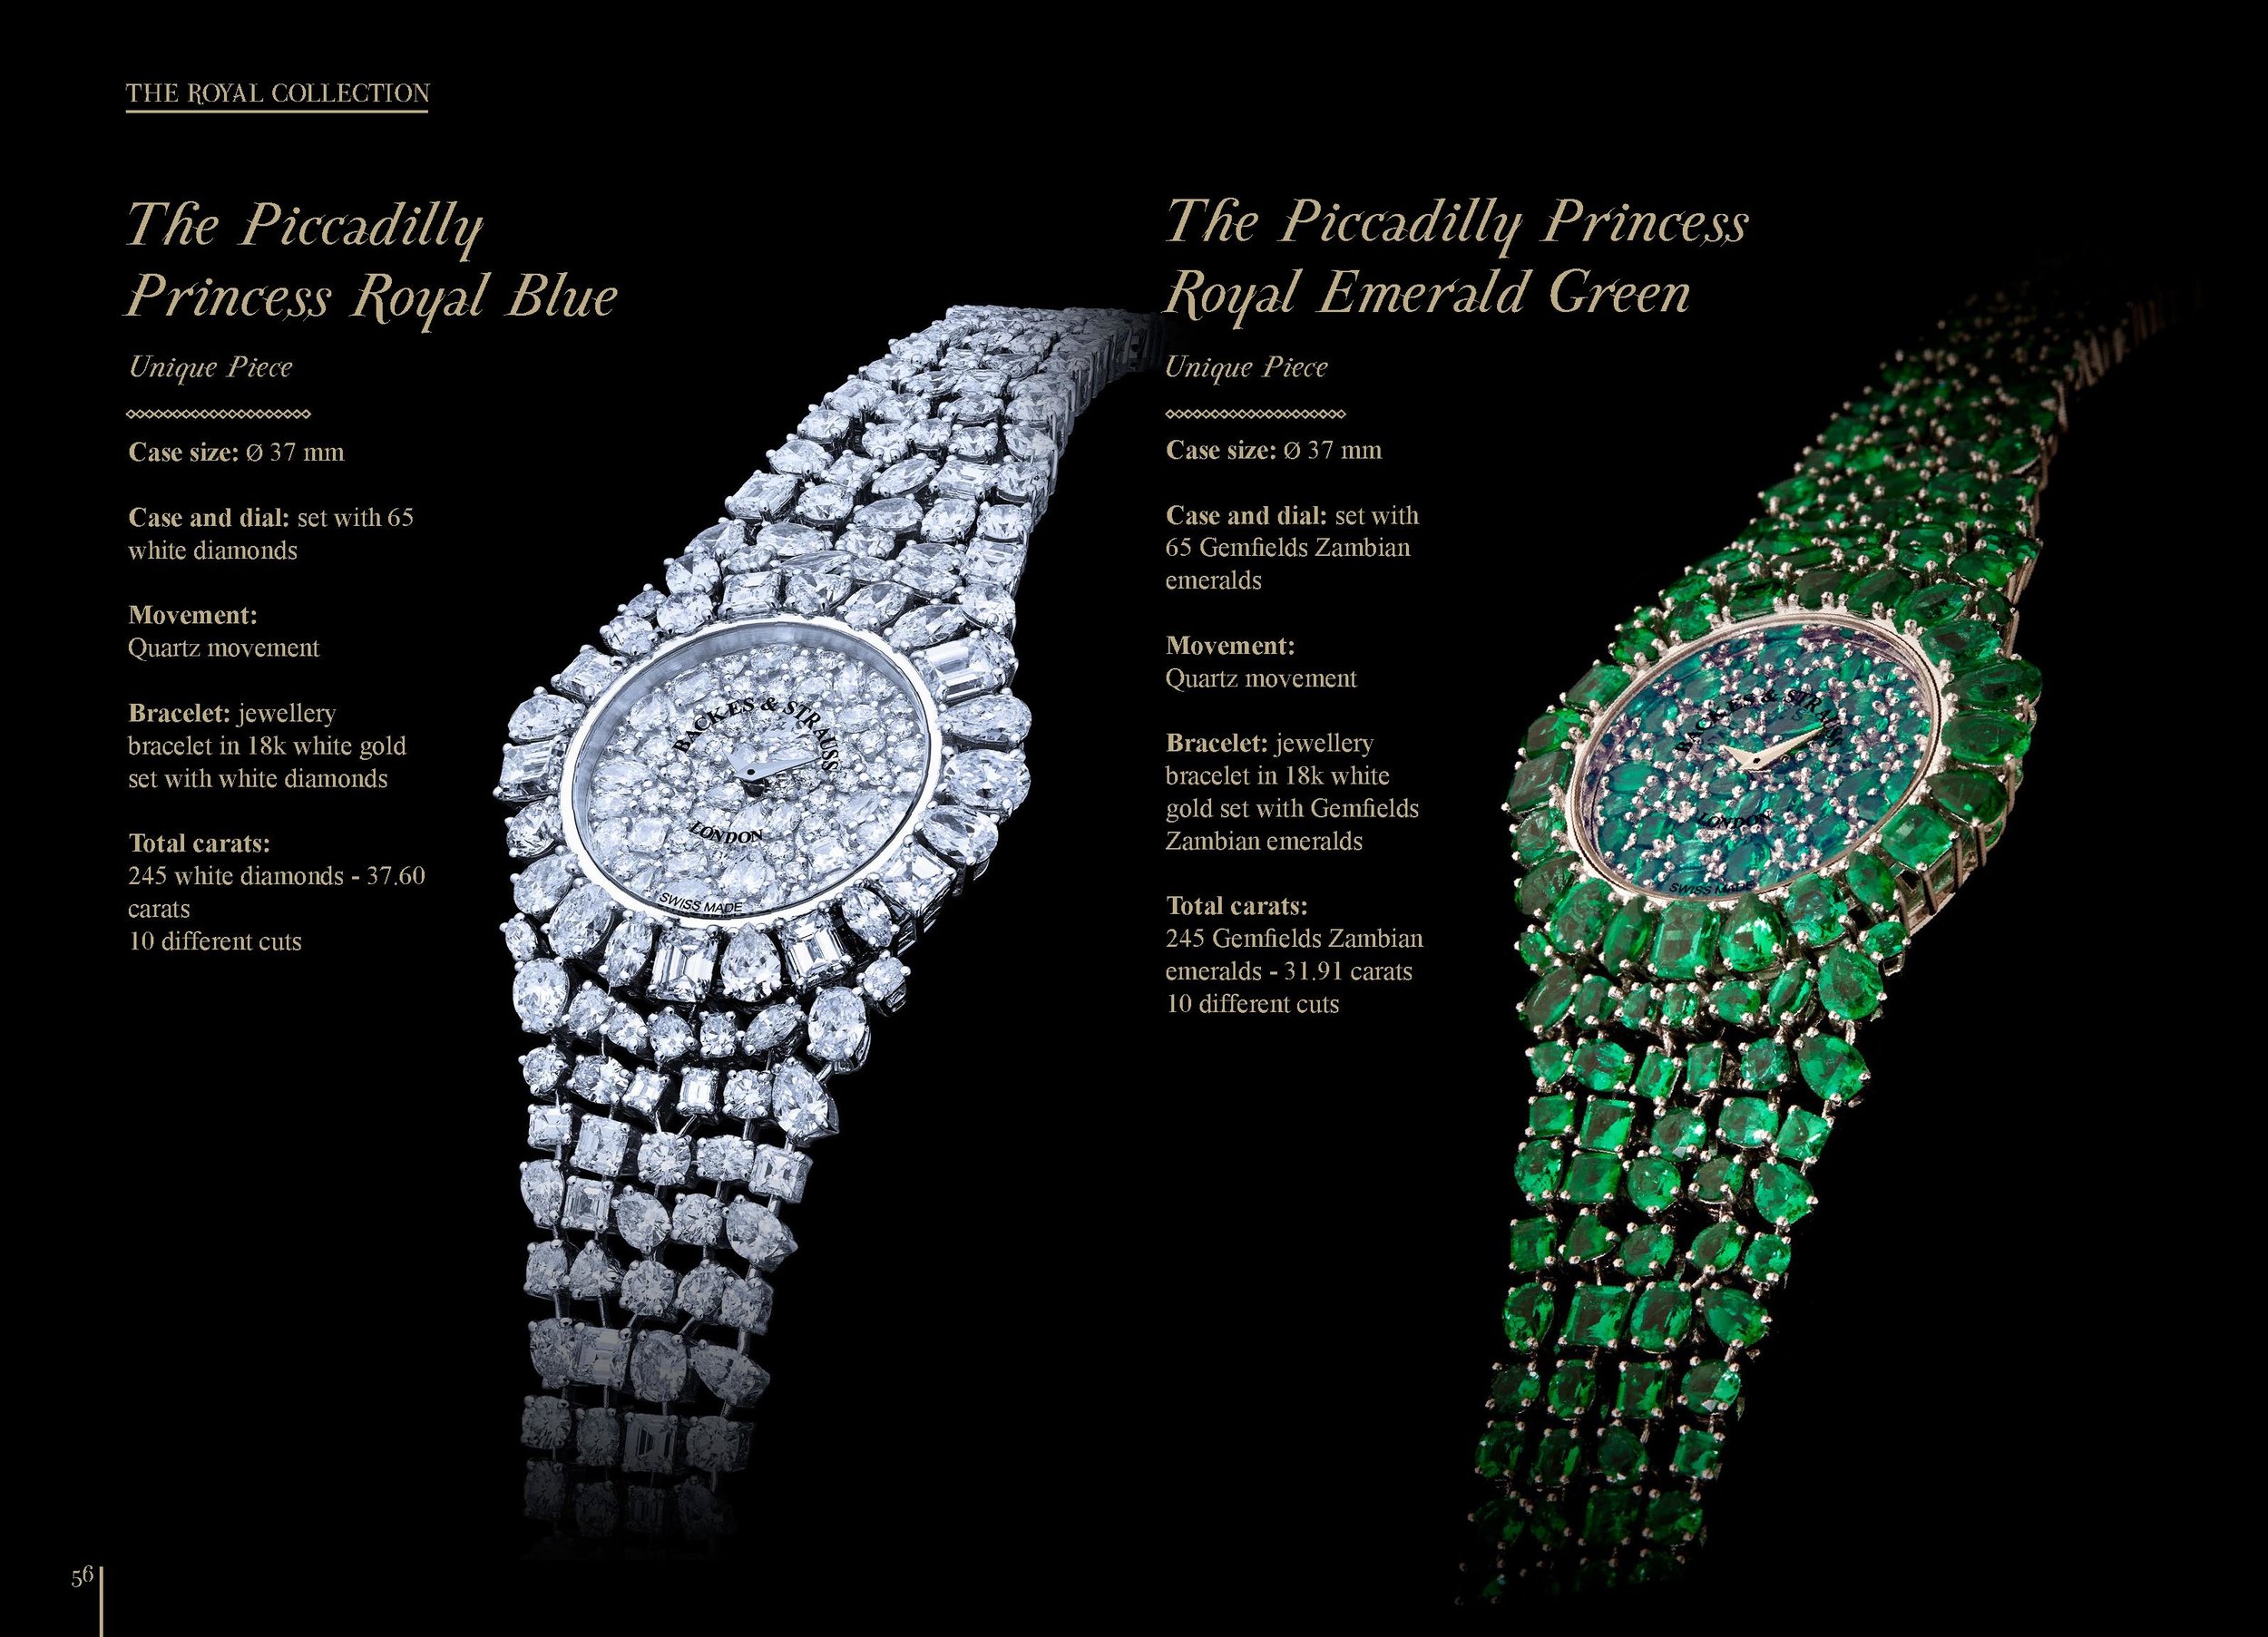 The Piccadilly Princess Royal Emerald Green and Blue masterpiece